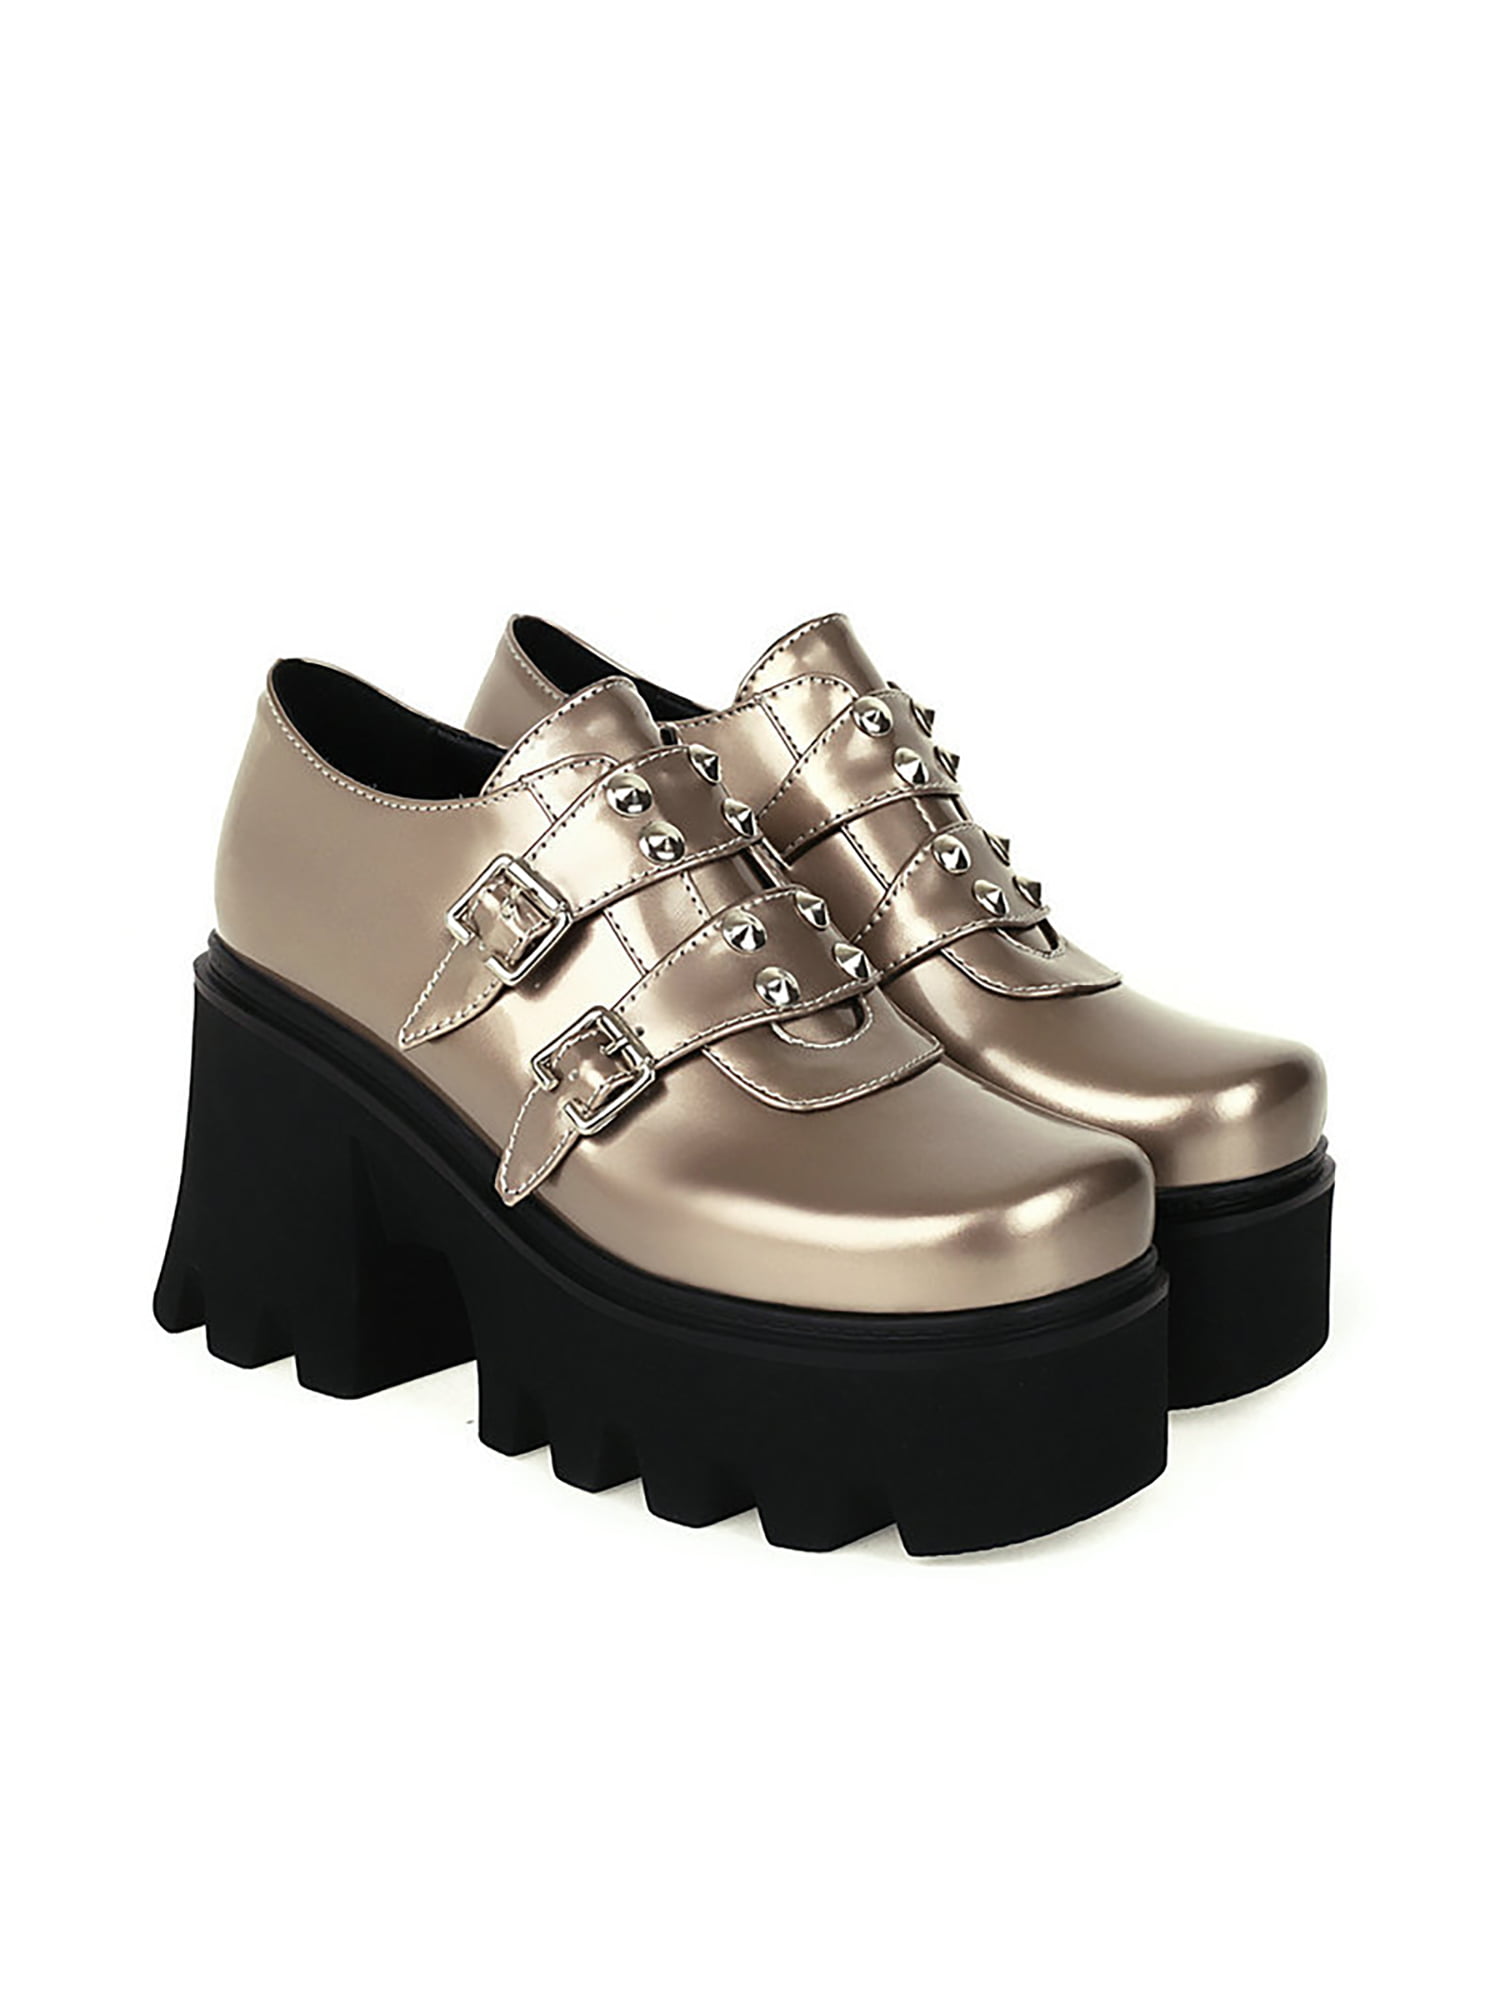 Chic Womens Buckle Gothic Punk Retro Creeper Platform Ankle Boots Round Toe Shoe 